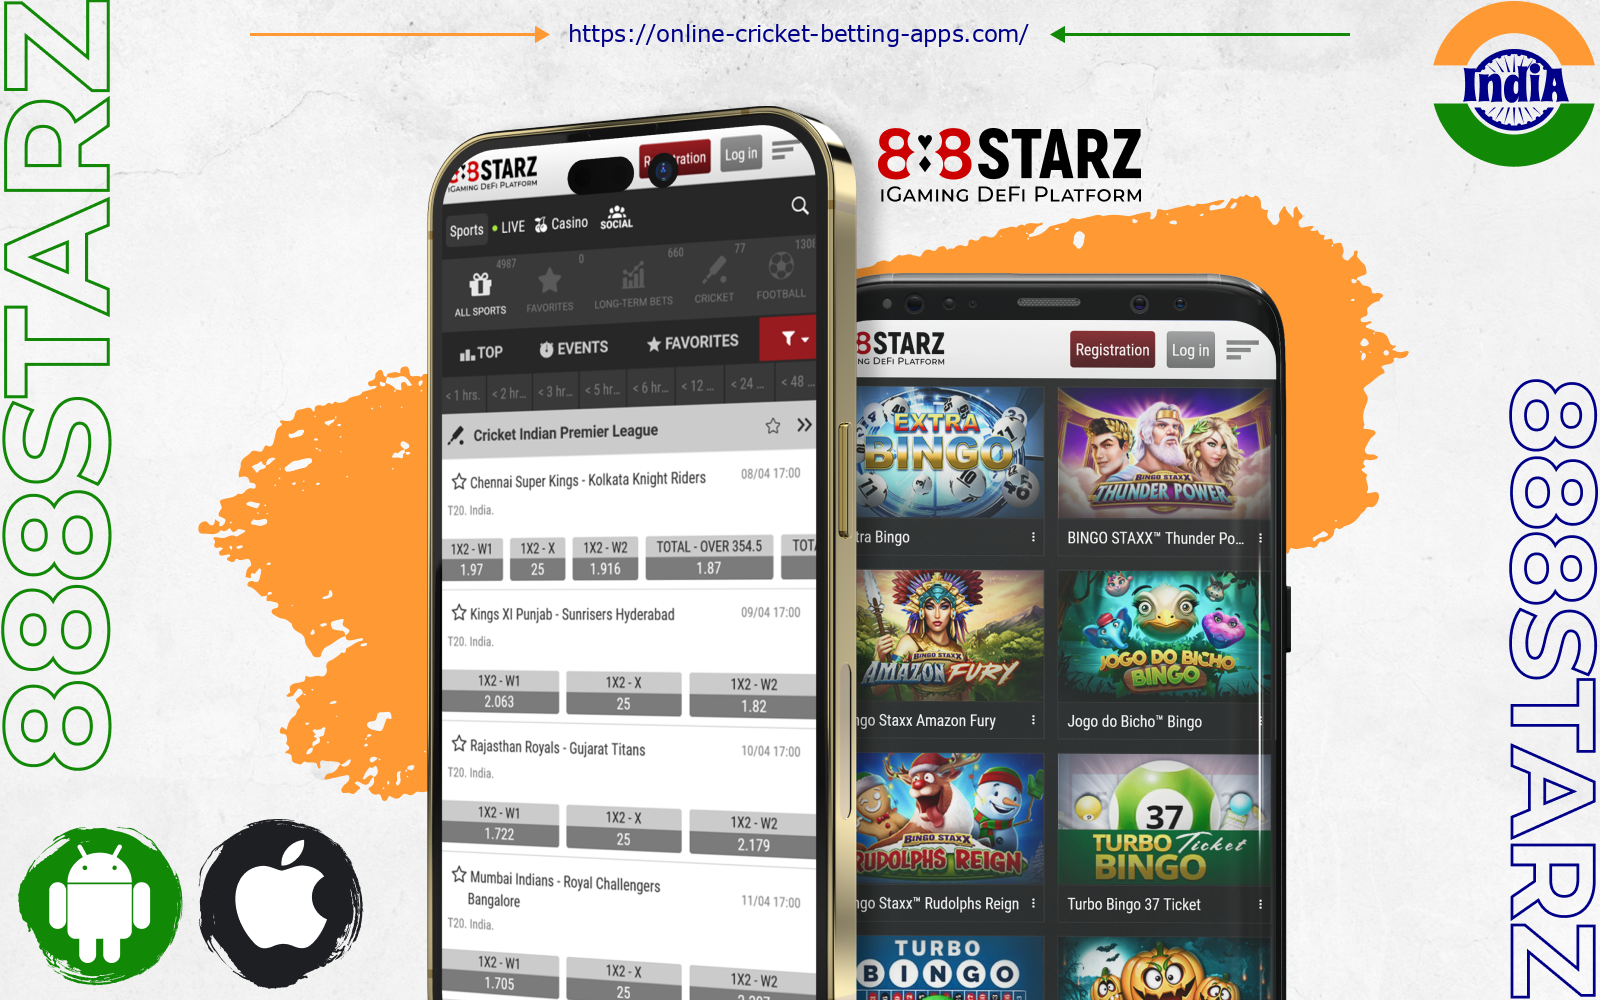 The 888starz app for Android and iOS is perfectly optimised for comfortable play and definitely deserves a place in the list of best cricket betting apps in India